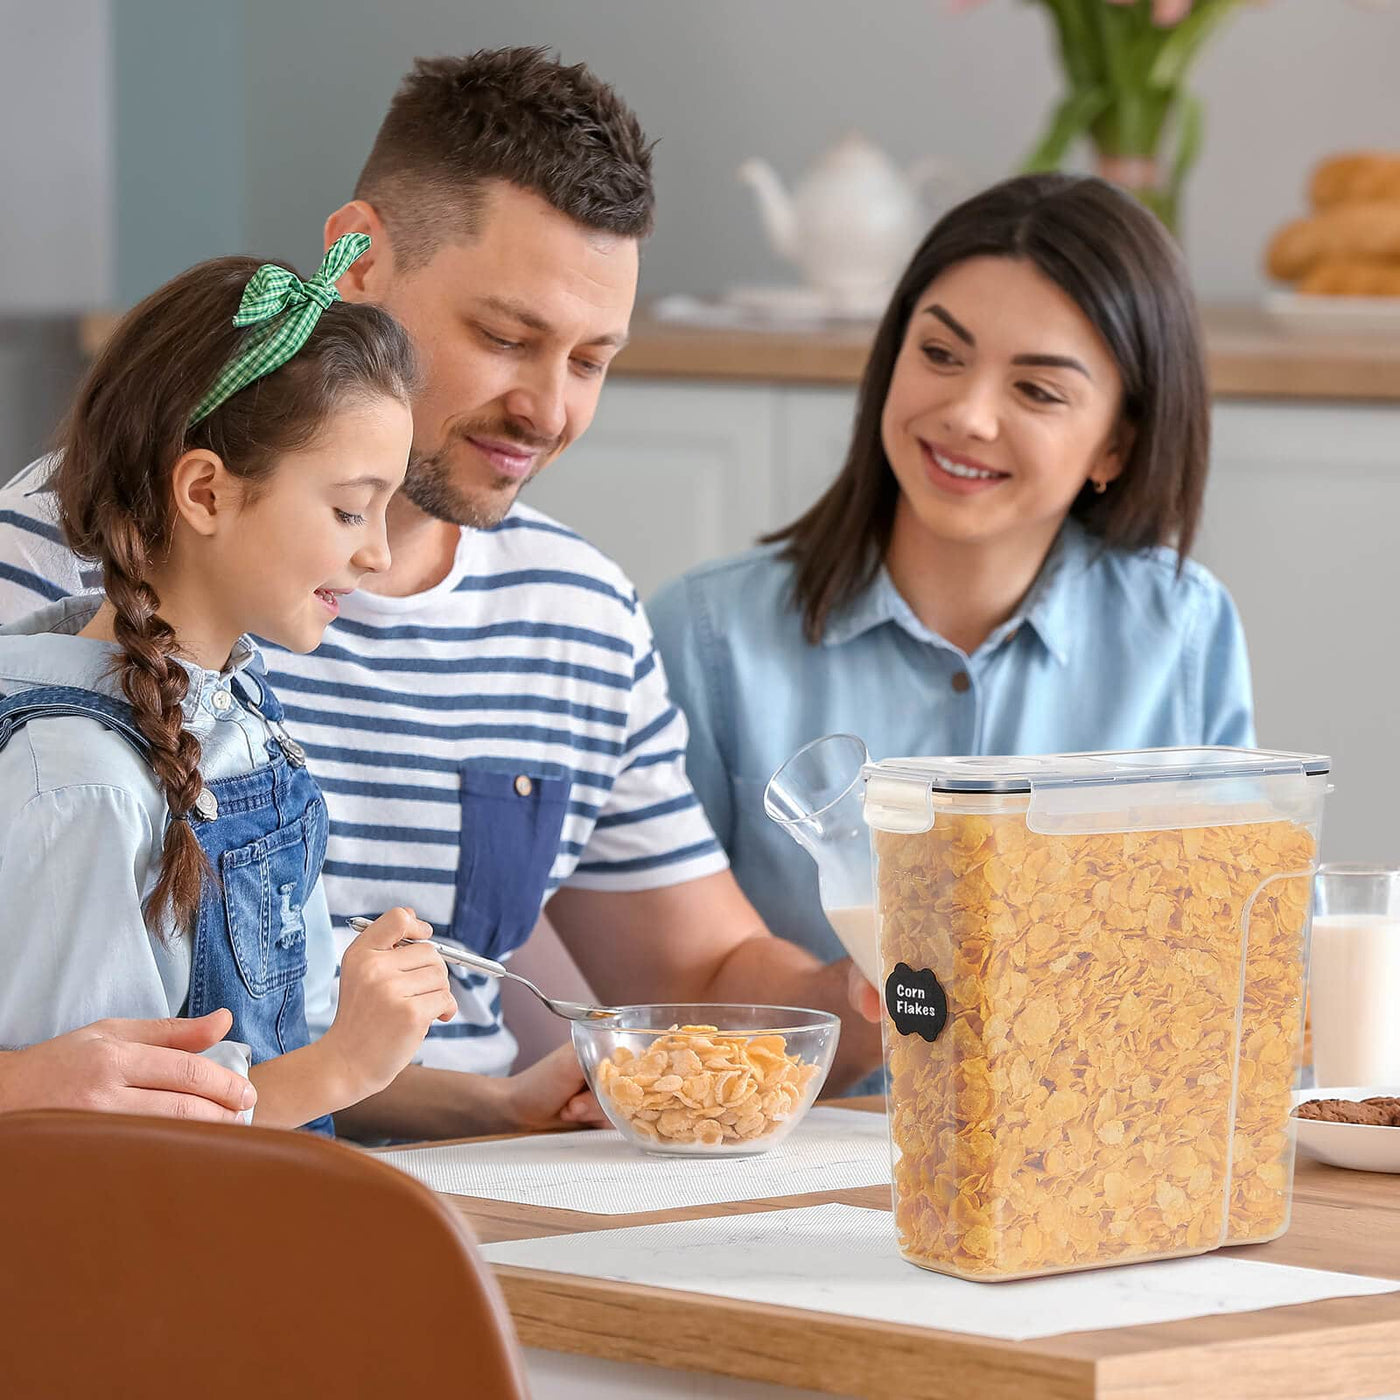 Airtight Cereal Container with Lids - Lifewit – Lifewitstore